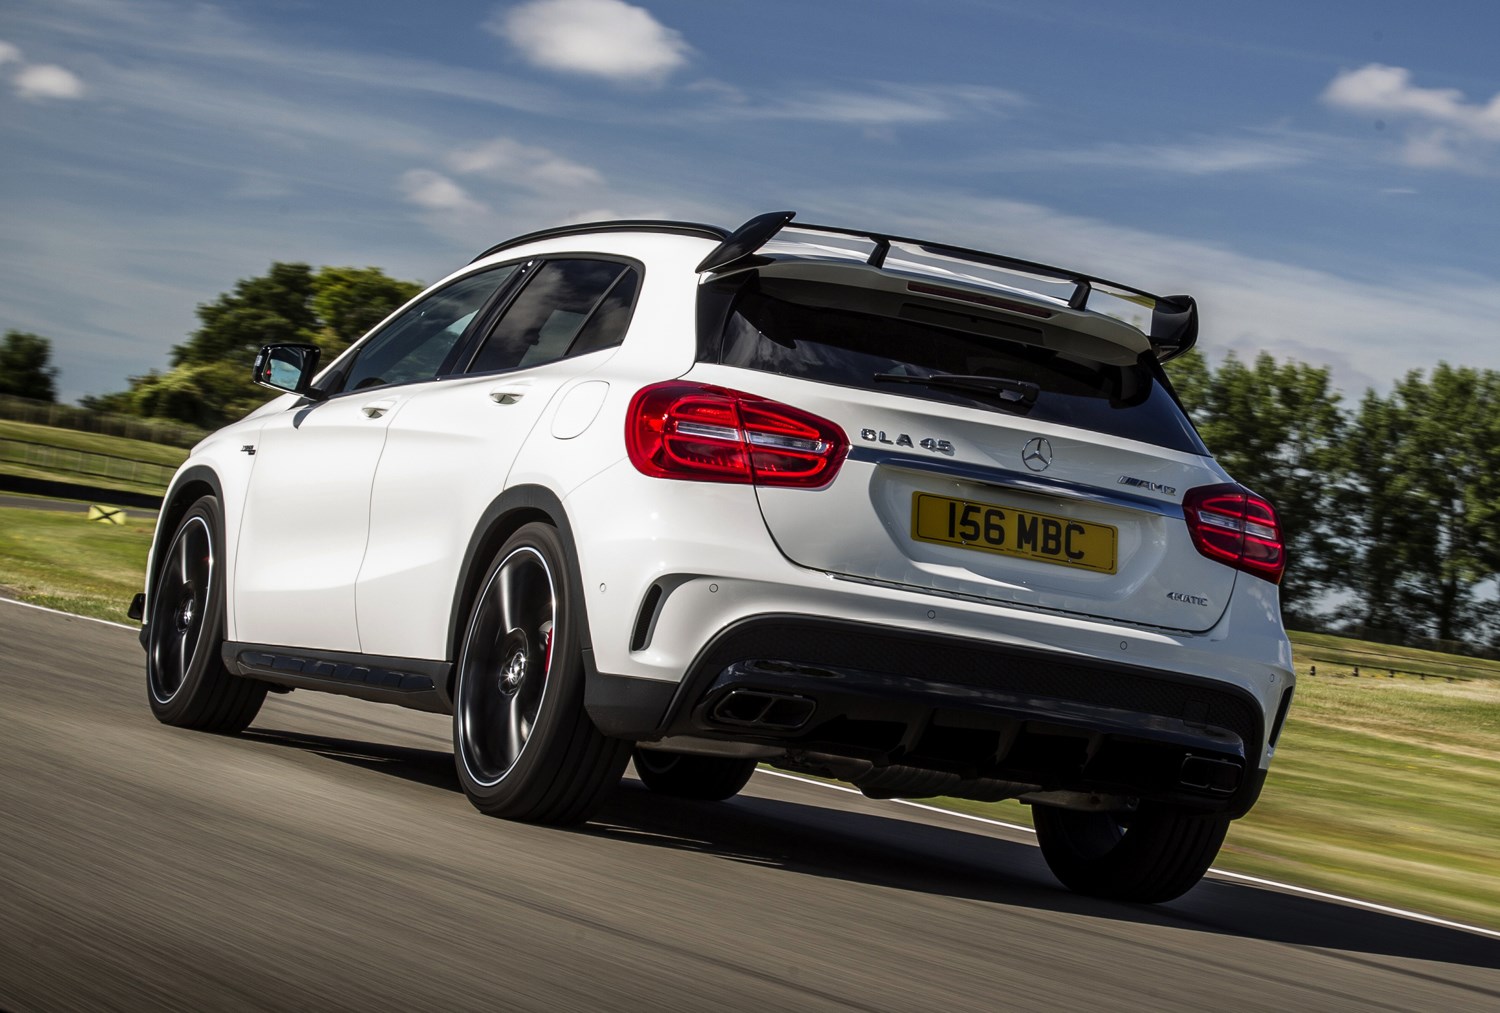 Used Mercedes-Benz GLA-Class AMG (2014 - 2017) Review ...